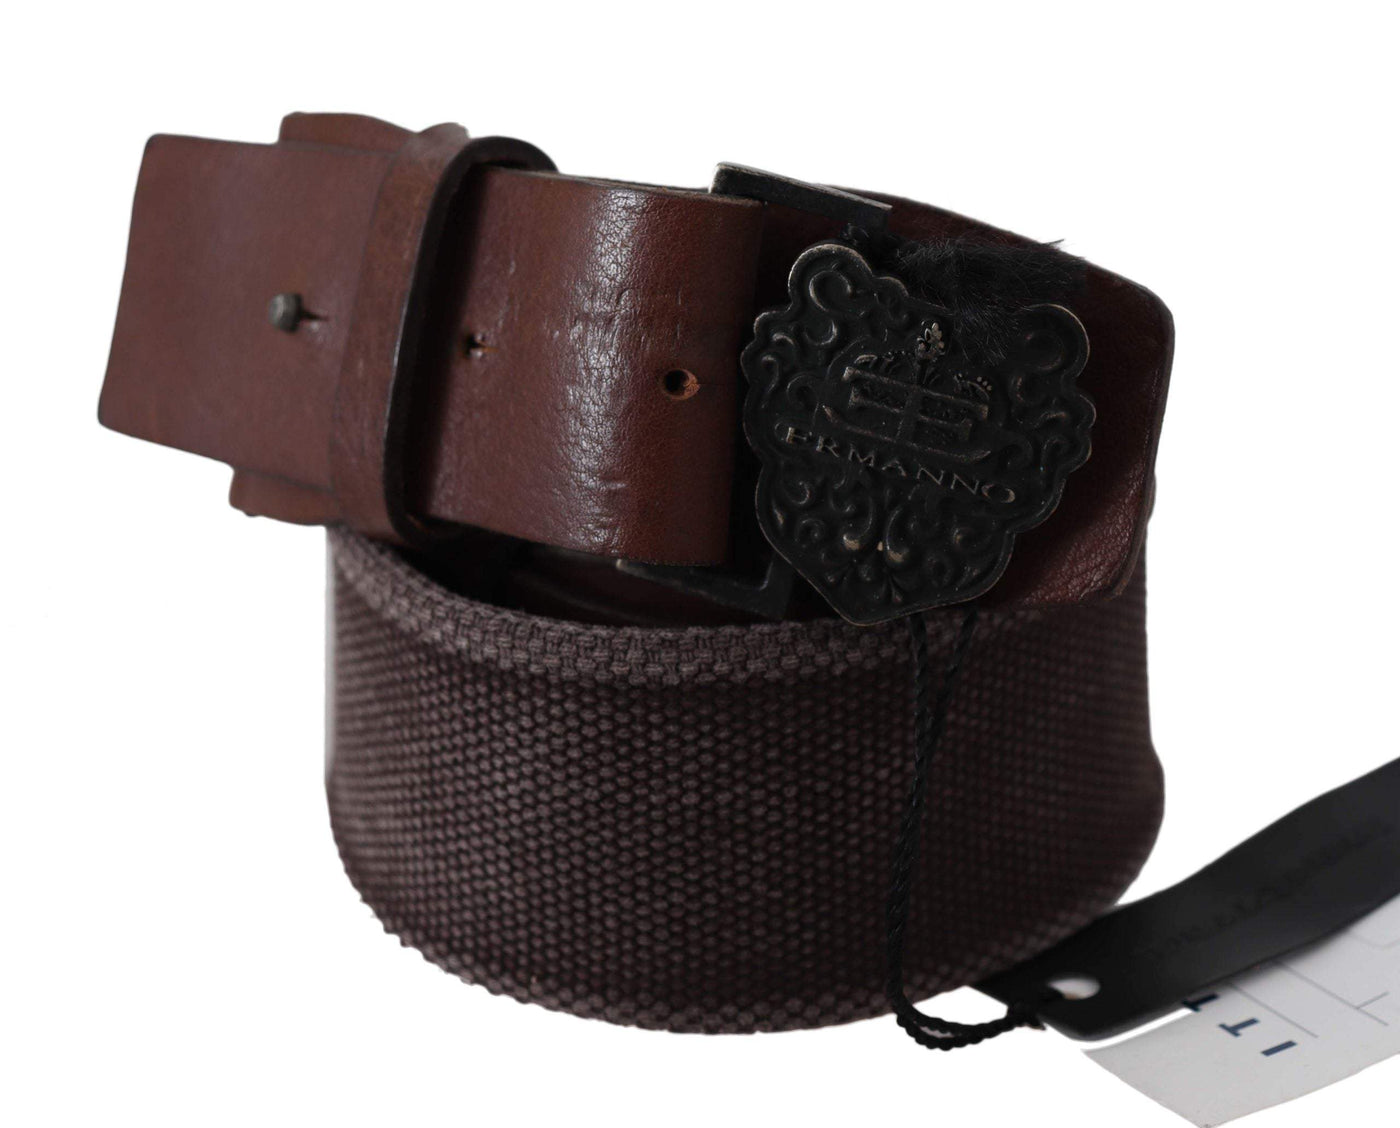 Ermanno Scervino Dark Brown Leather Wide Buckle Waist Belt #women, 70 cm / 28 Inches, Accessories - New Arrivals, Belts - Women - Accessories, Brown, Ermanno Scervino, feed-agegroup-adult, feed-color-brown, feed-gender-female at SEYMAYKA